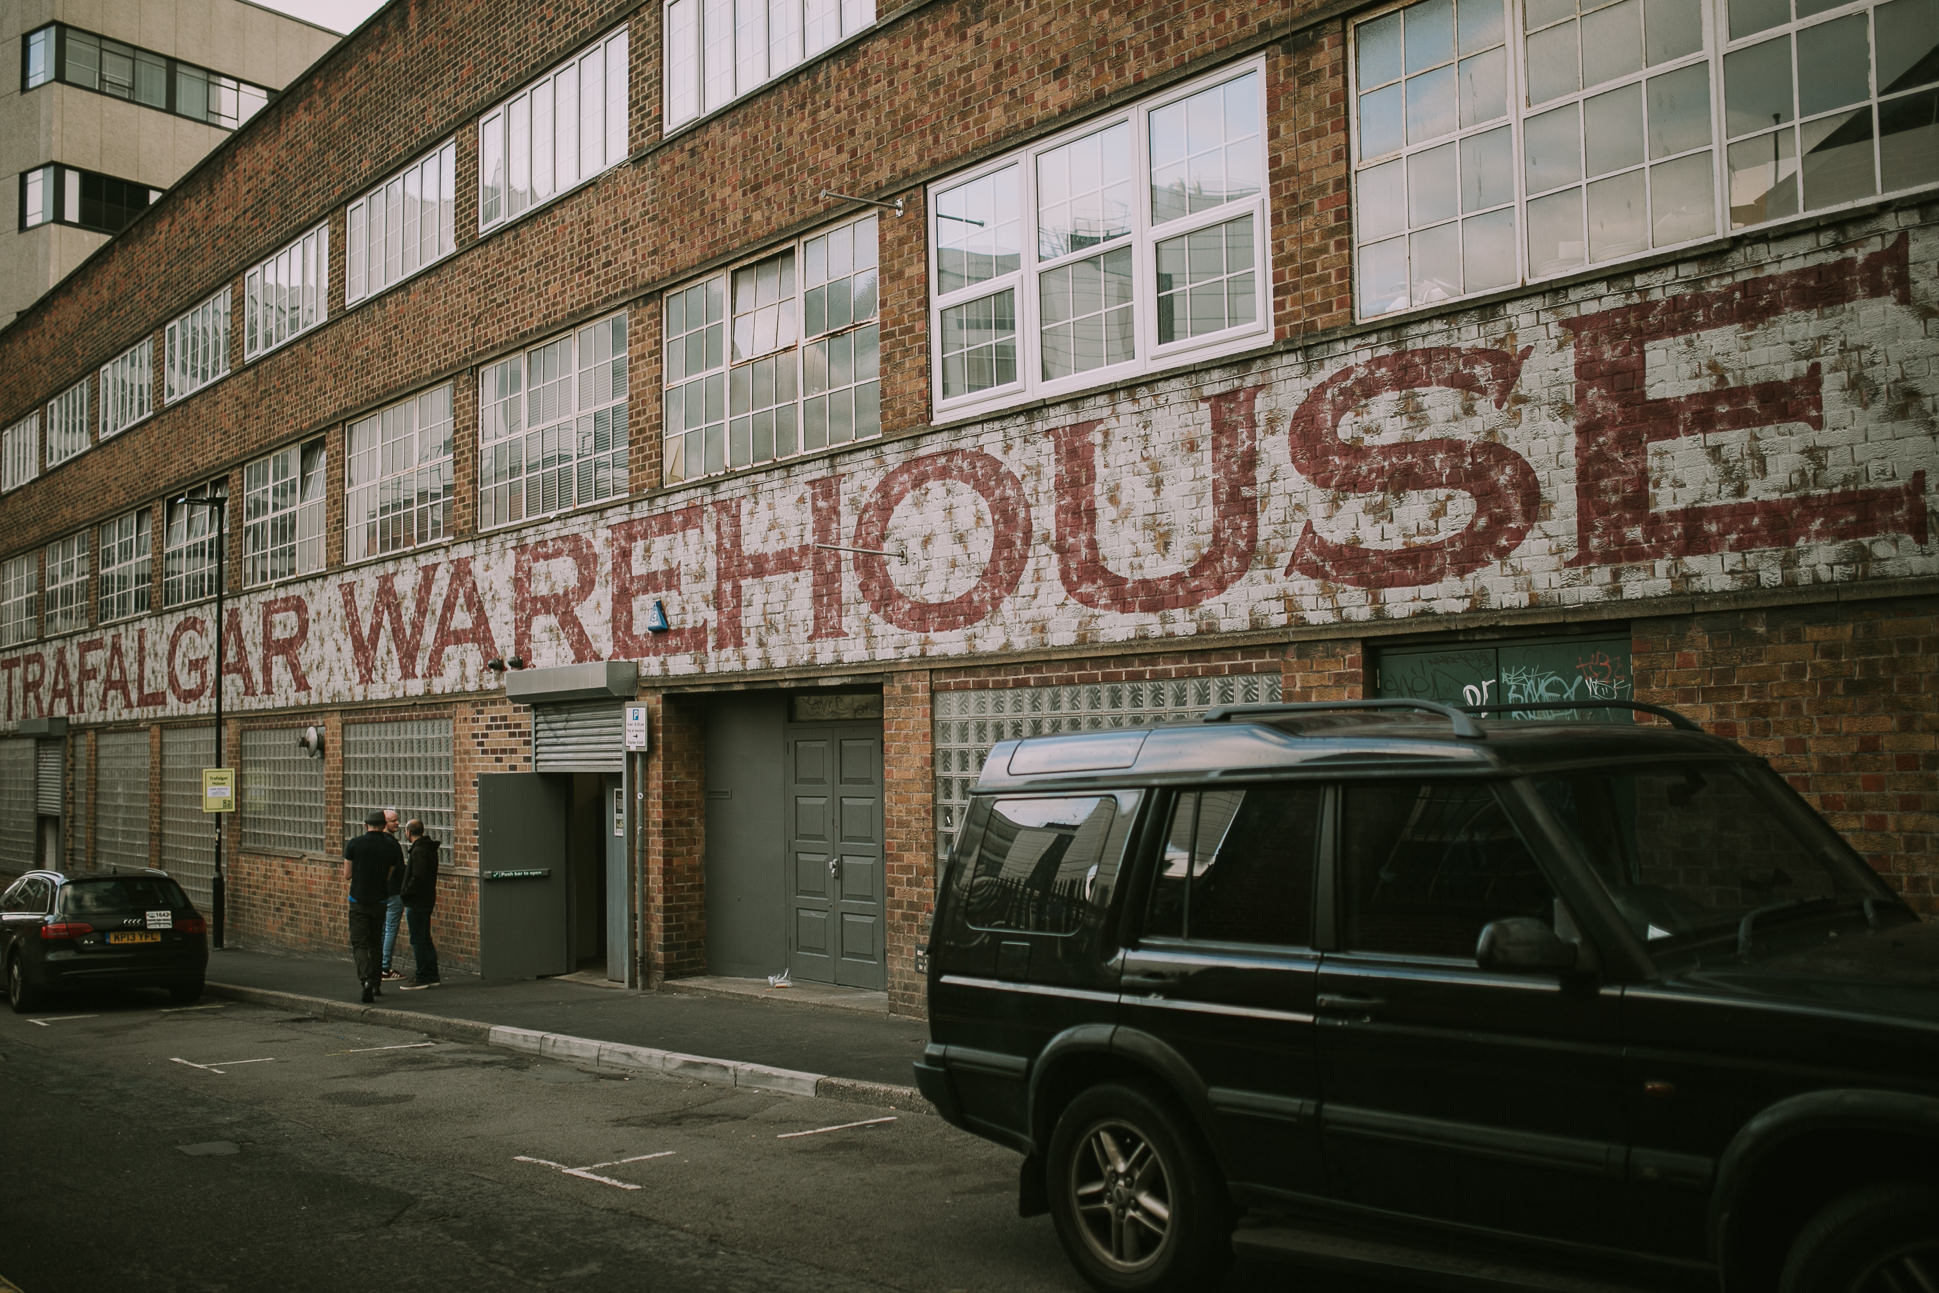 Outside Trafalgar Warehouse - events venue. Industrial Venue with rustic, big lettering on the frontage.